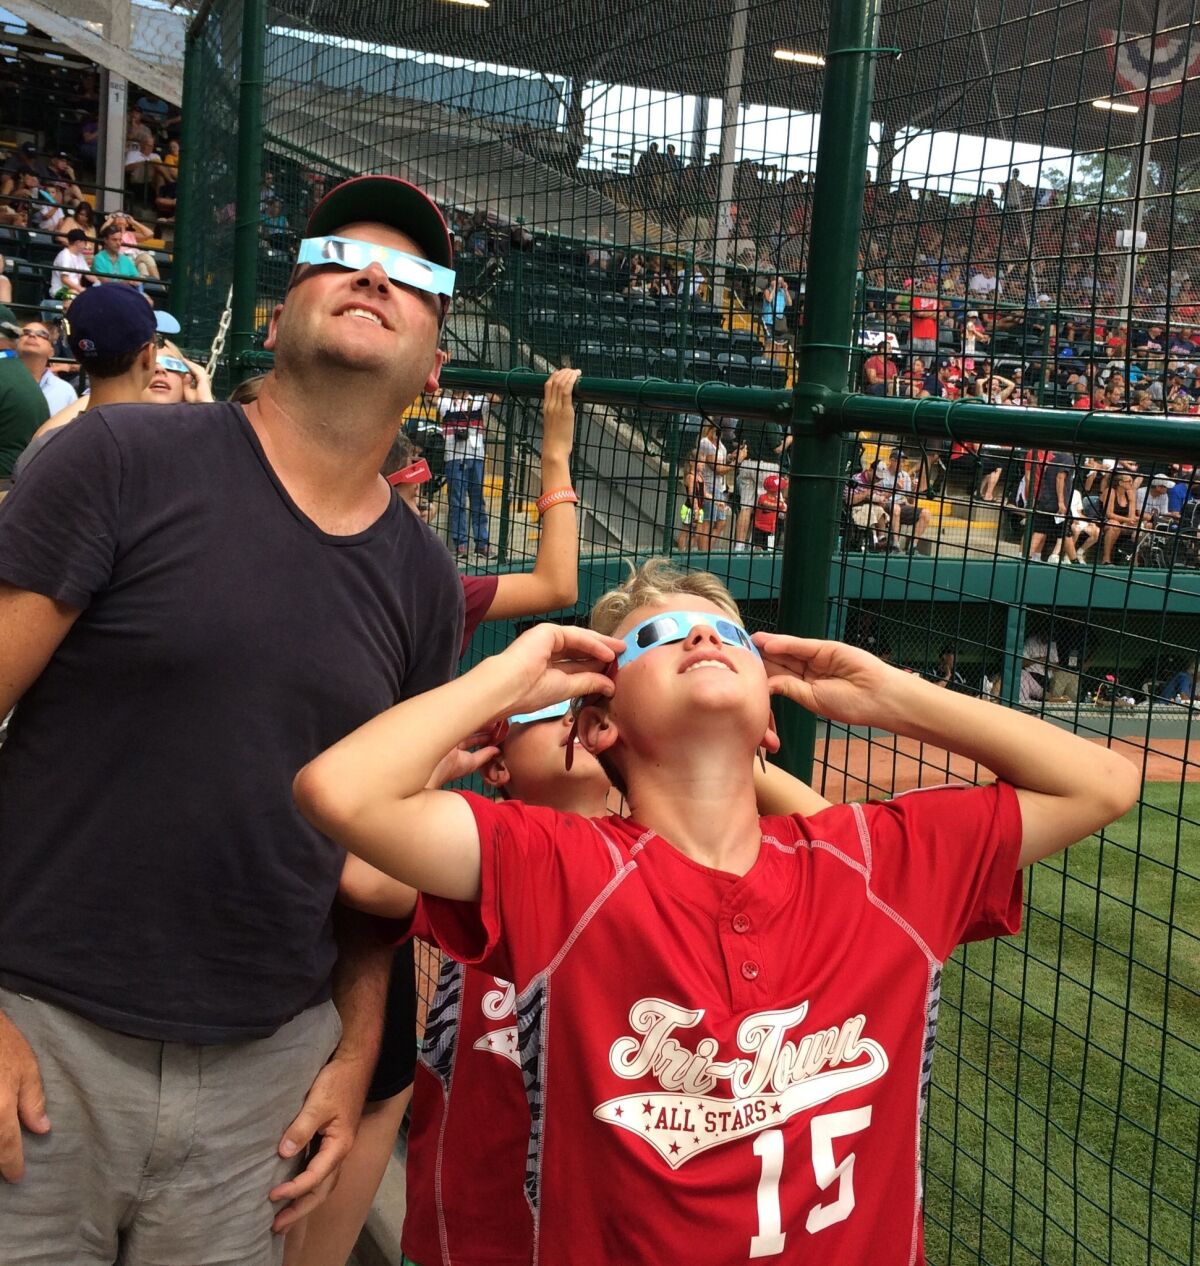 Mike Wenzel and sons Kyke and A.J. of New Jersey check out the solar eclipse between games at the Little League World Series in South Williamsport, Pa. on Monday.